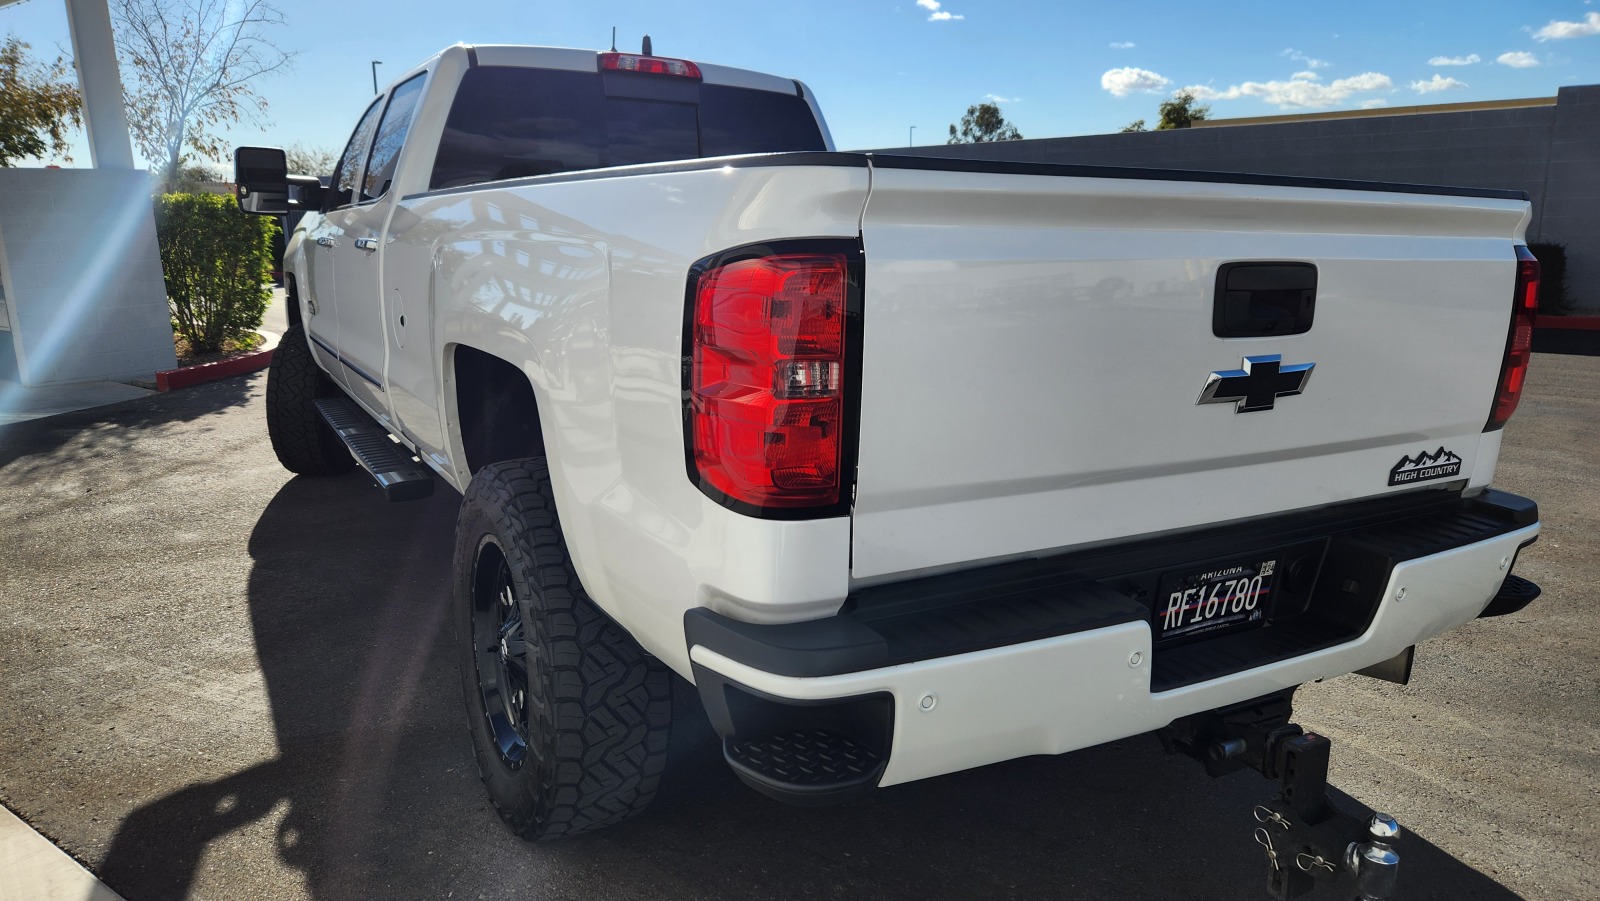 For Sale: 2019 Chevrolet 3500HD 4x4 High Country Crew Cab Long Bed Duramax - photo2